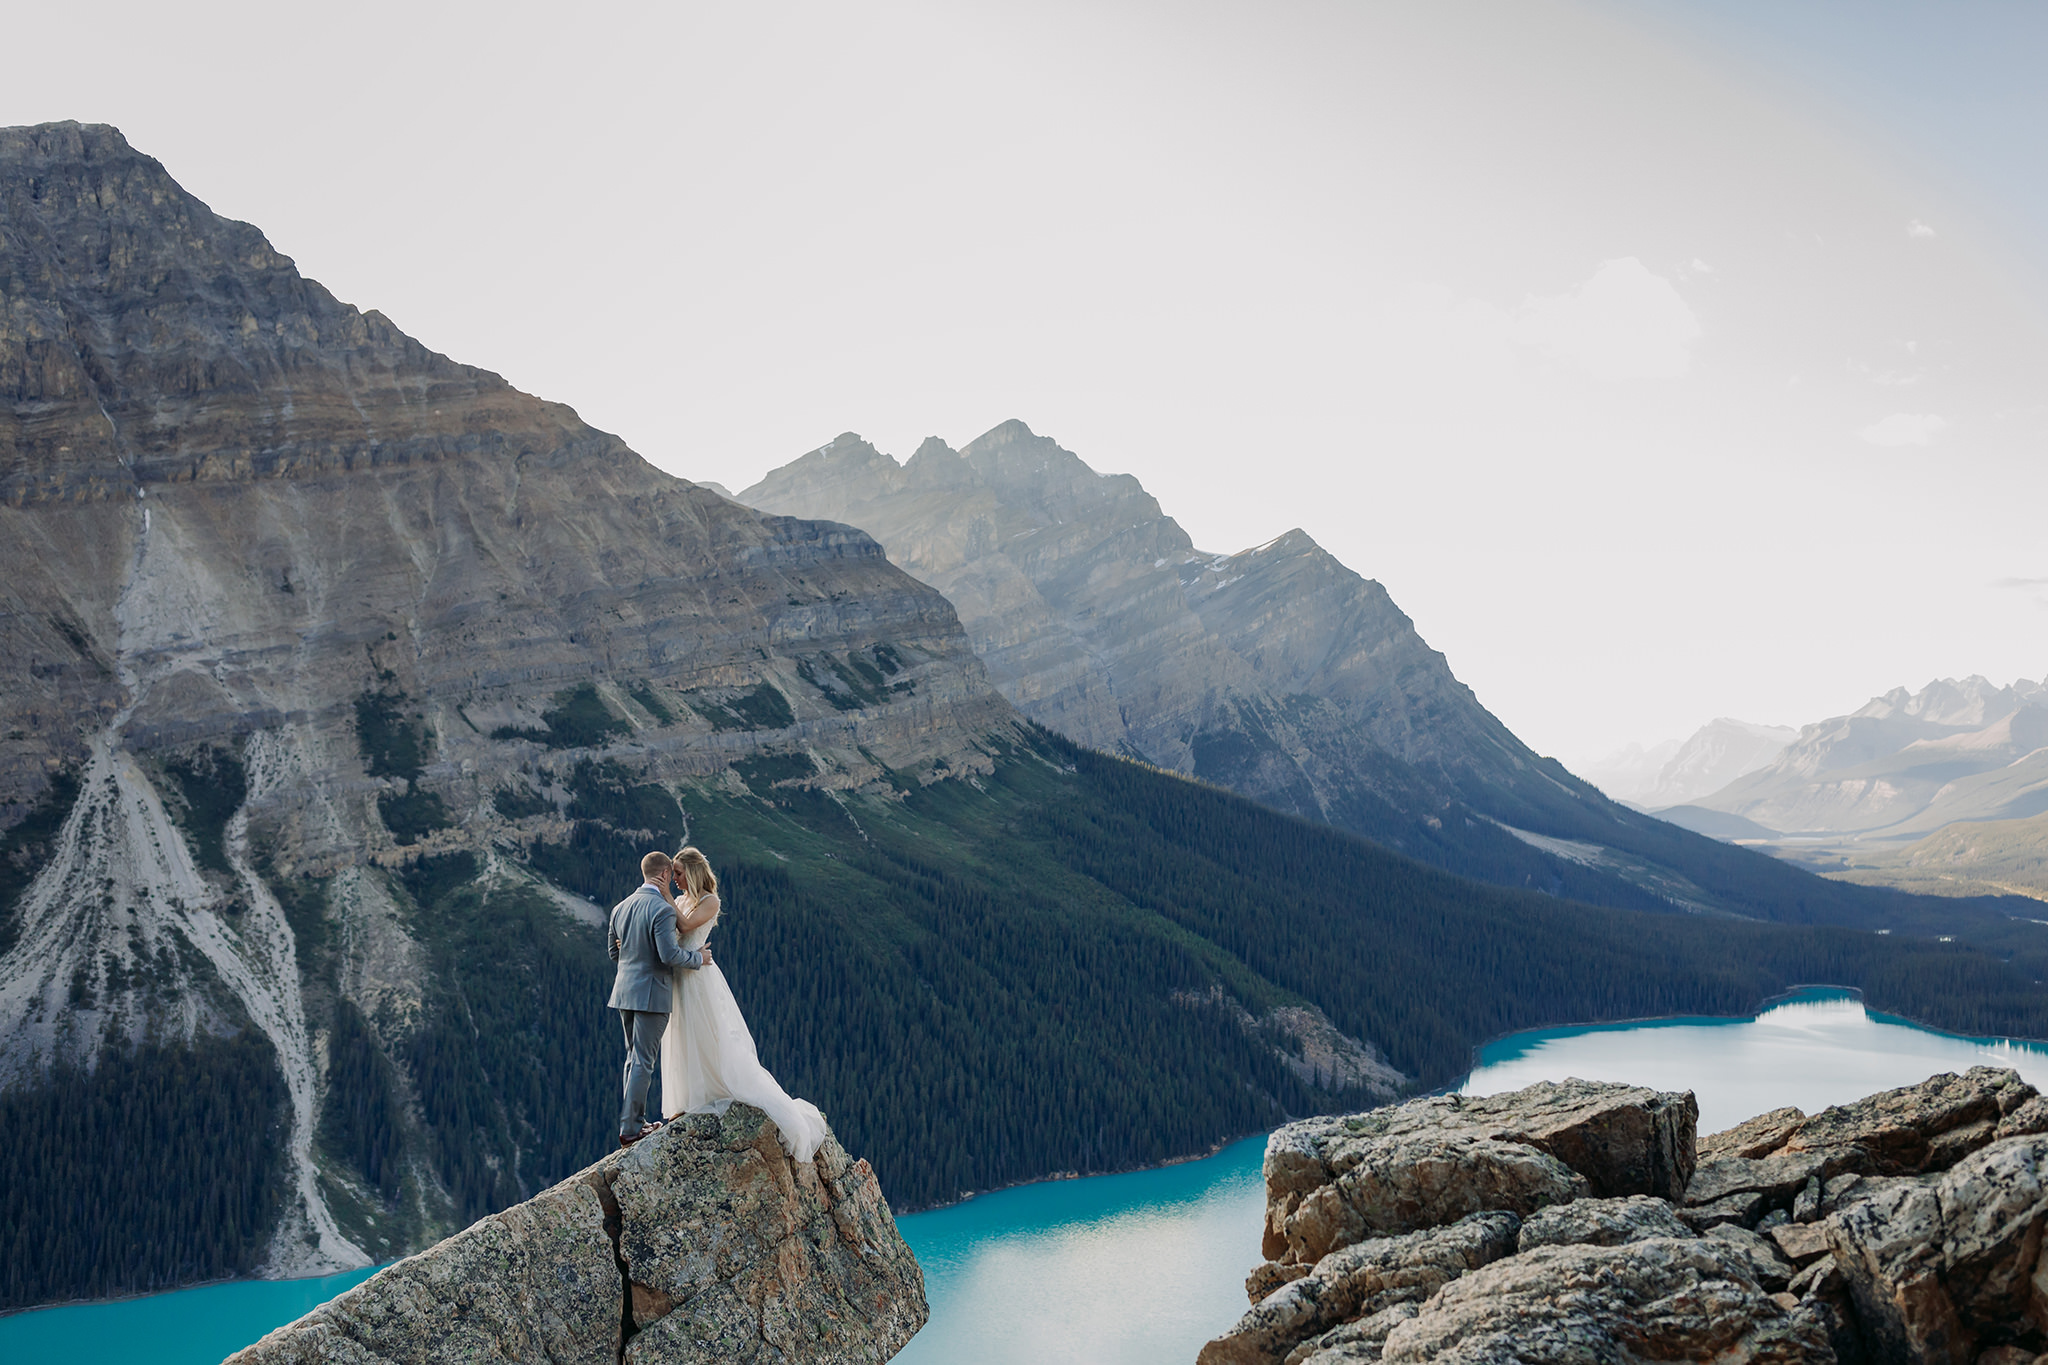 Adventuring in Banff National Park on their wedding day. Summer mountain elopement at Peyto Lake photographed by local wedding & elopement photographer ENV Photography 